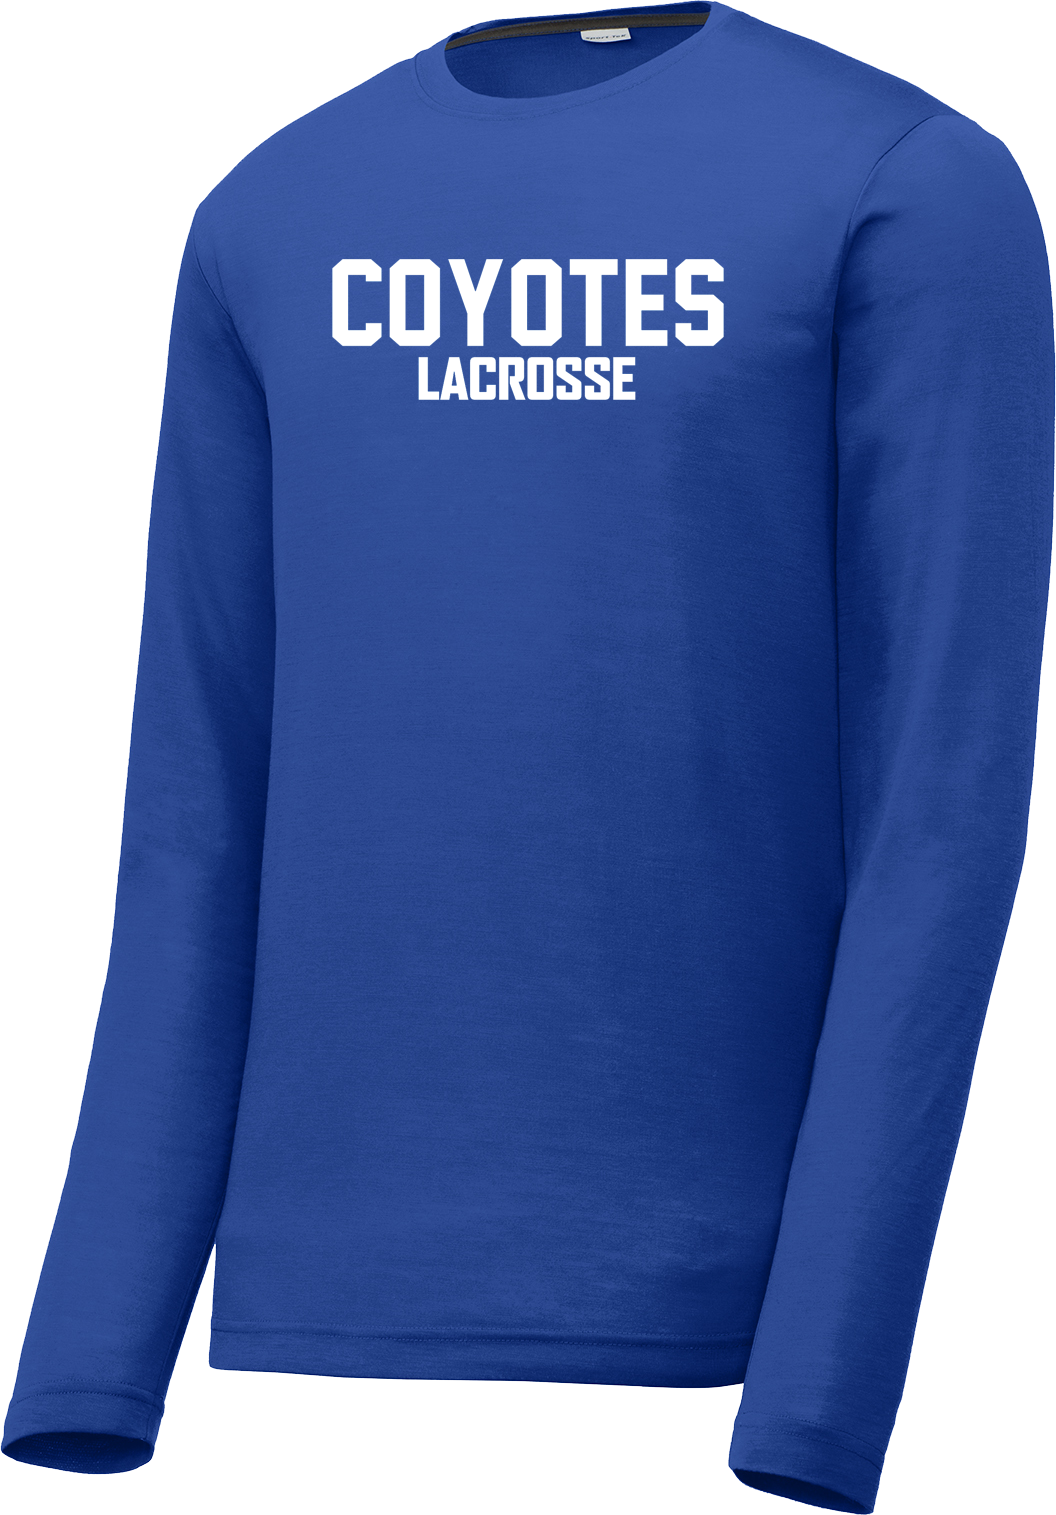 Coyotes Lacrosse Blue Long Sleeve CottonTouch Performance Shirt